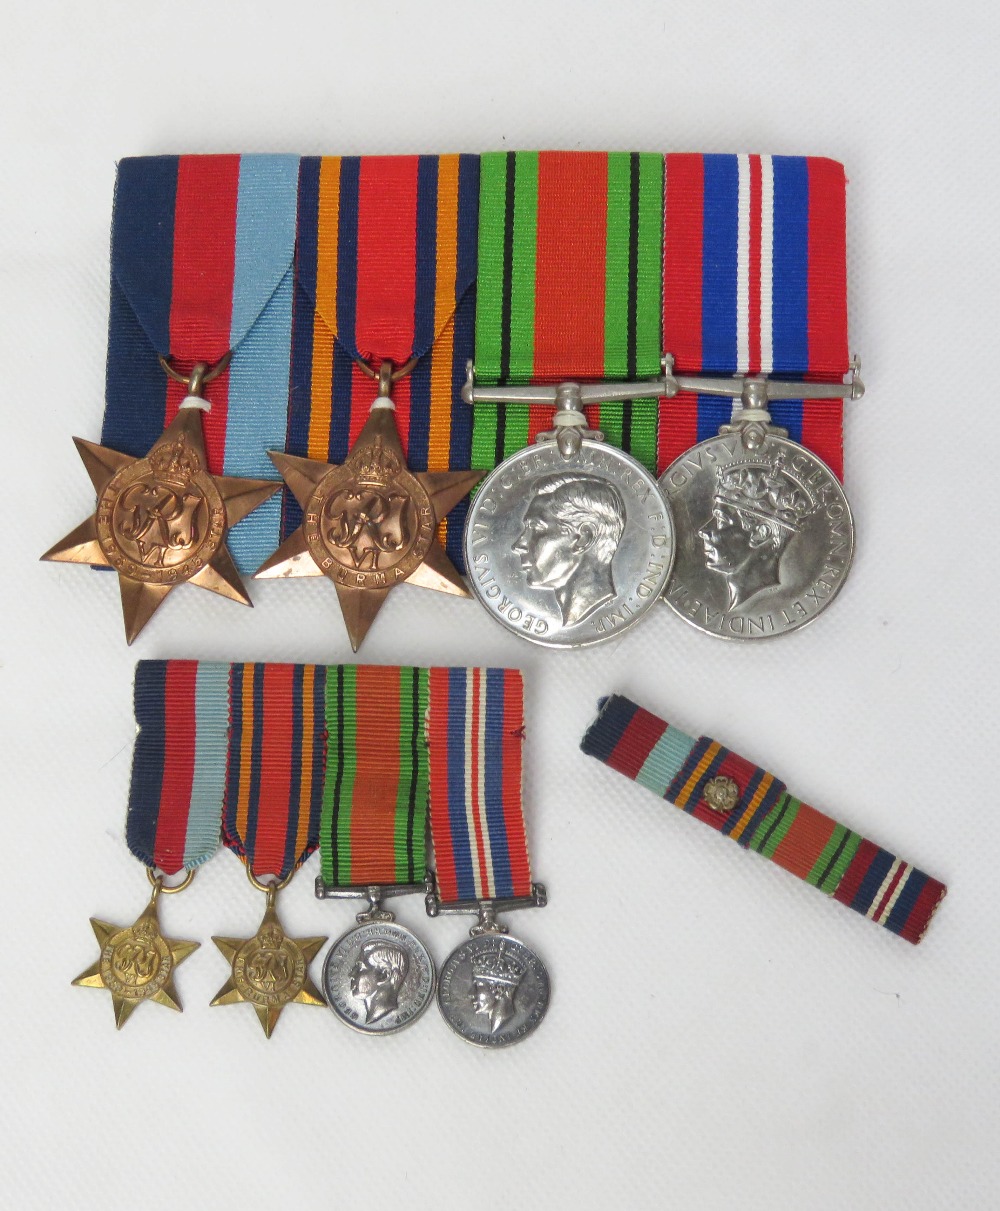 A WWII medal set with ribbons and matching miniature set. Unengraved.